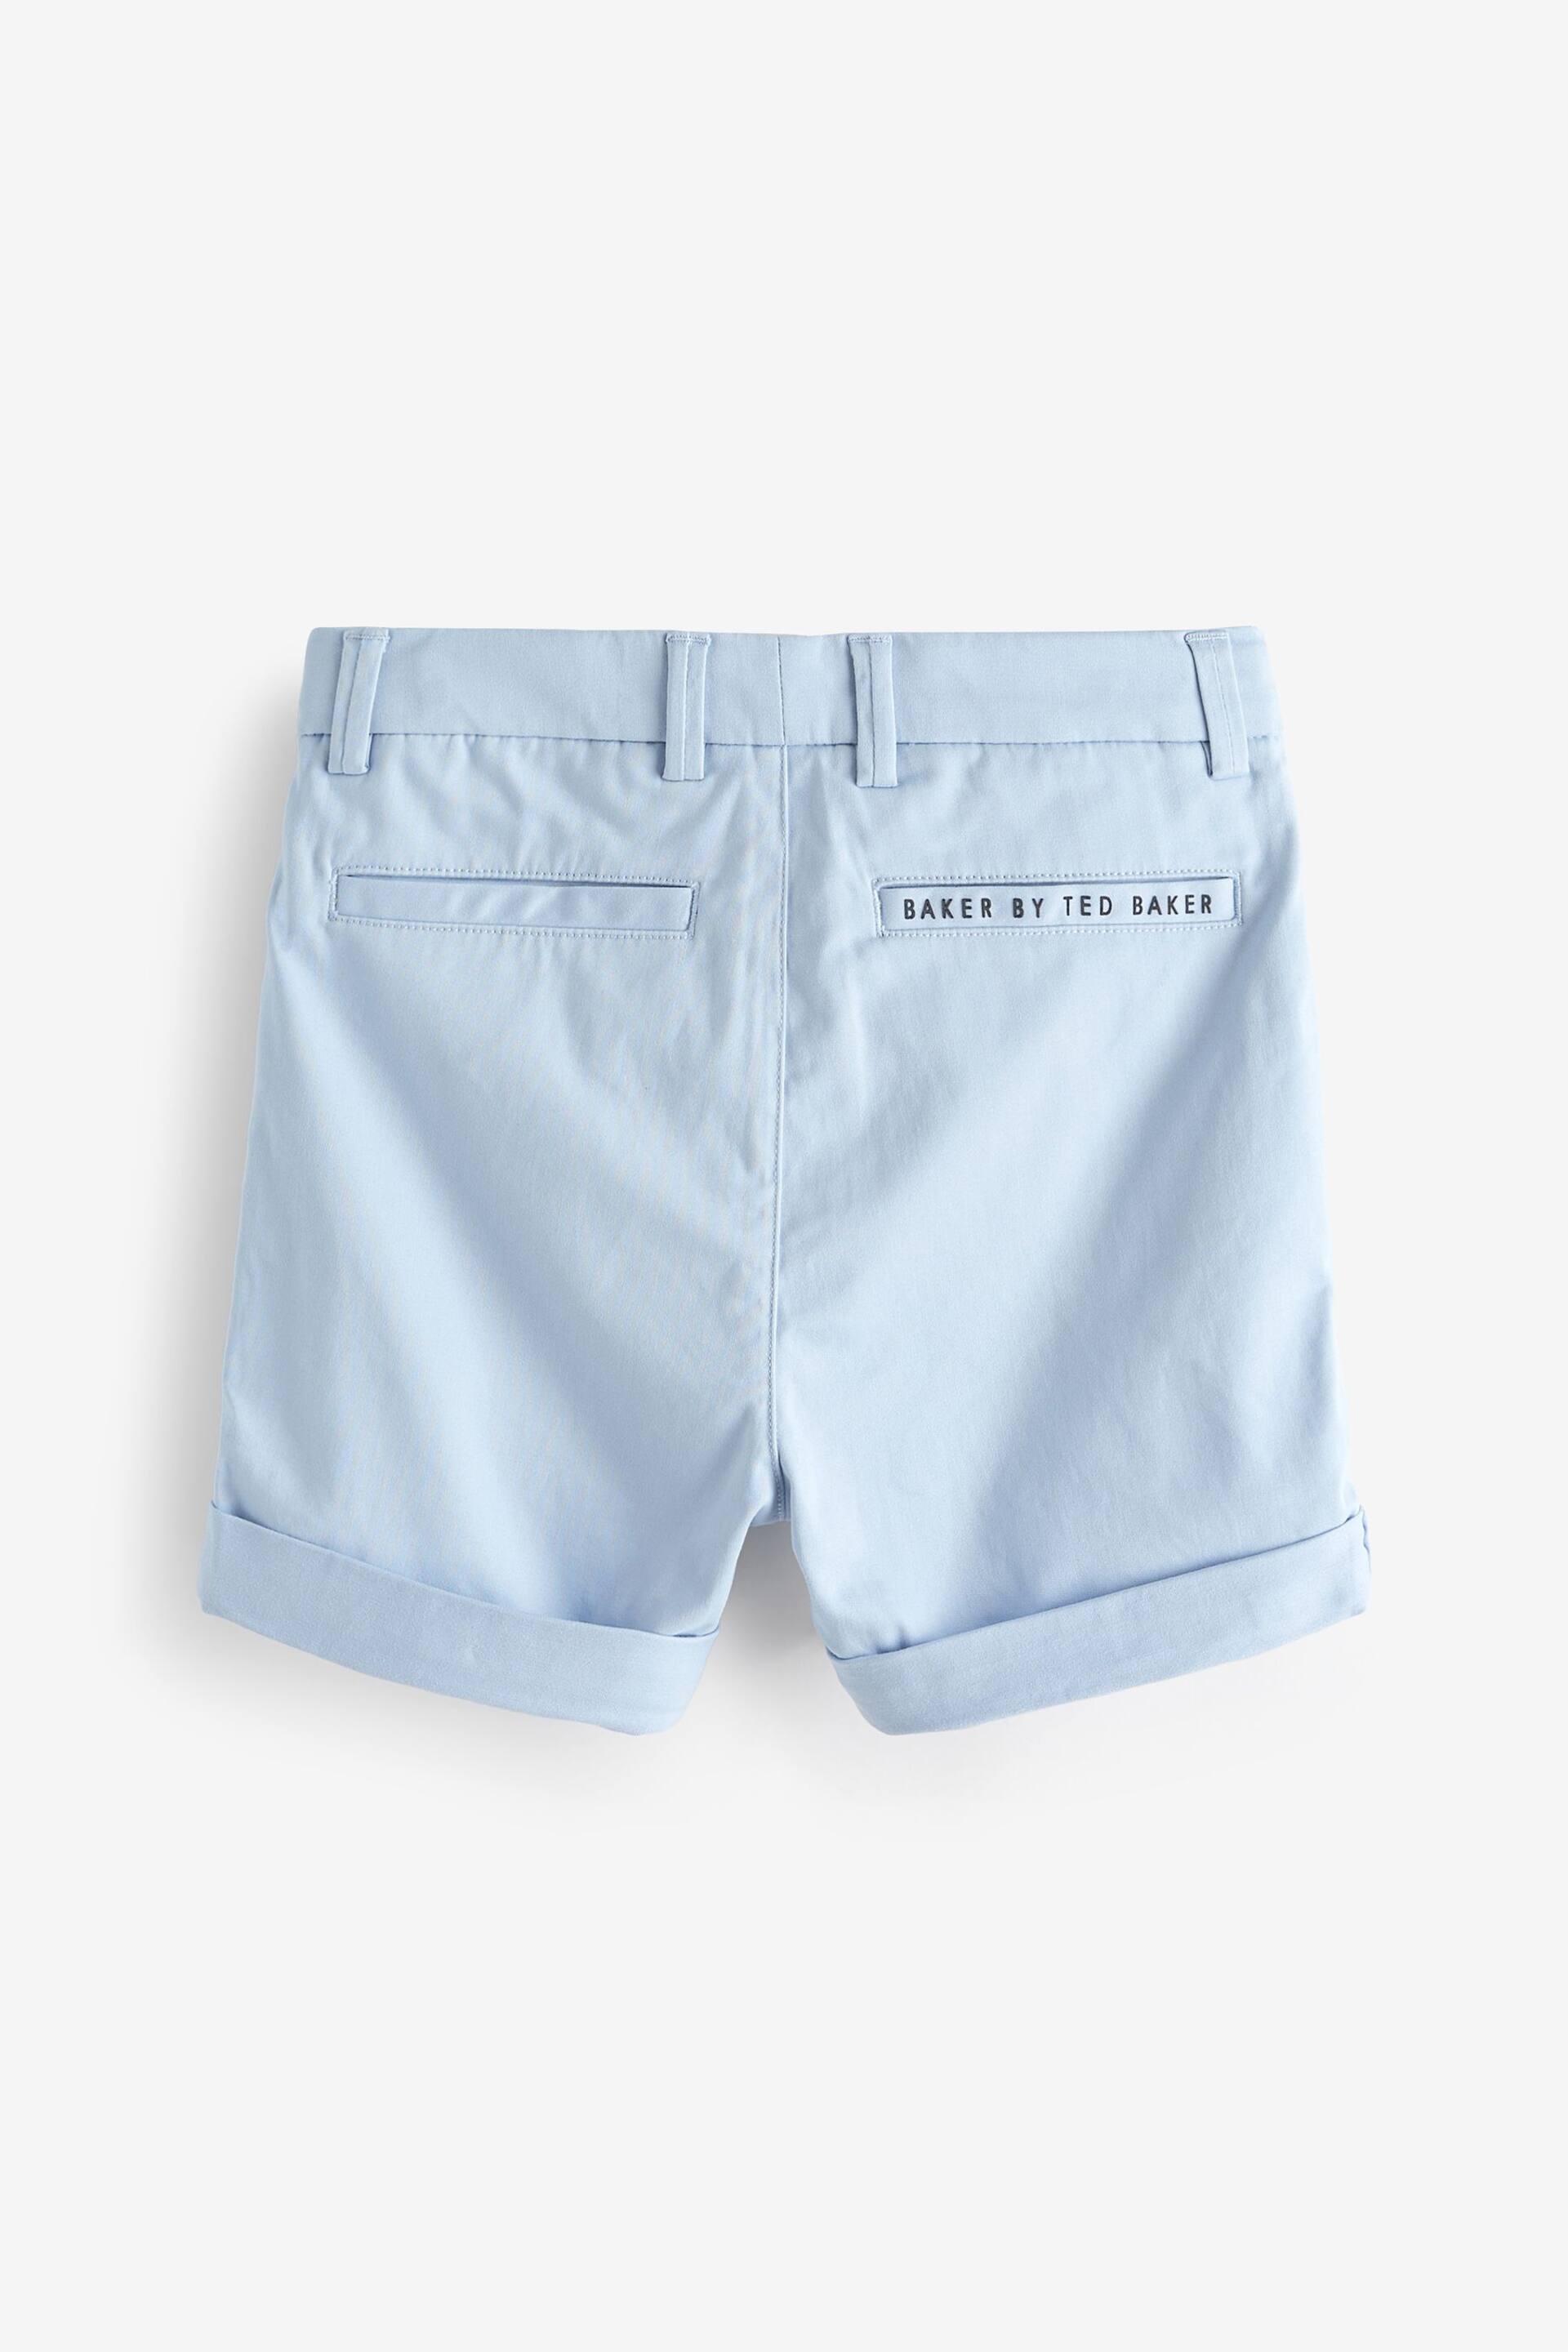 Baker by Ted Baker Chino Shorts - Image 2 of 4